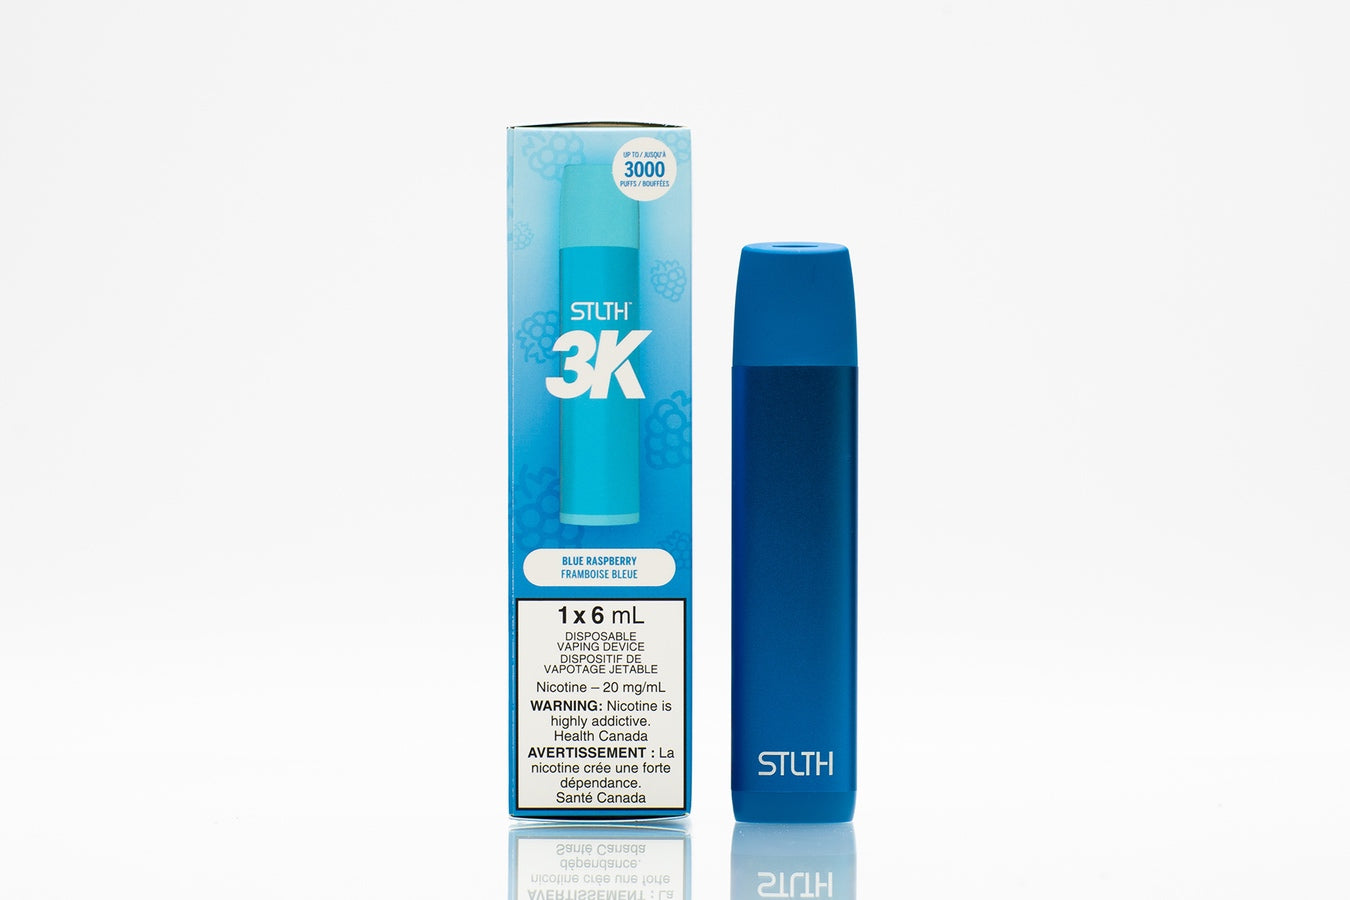 STLTH 3K disposable vape device next to packaging